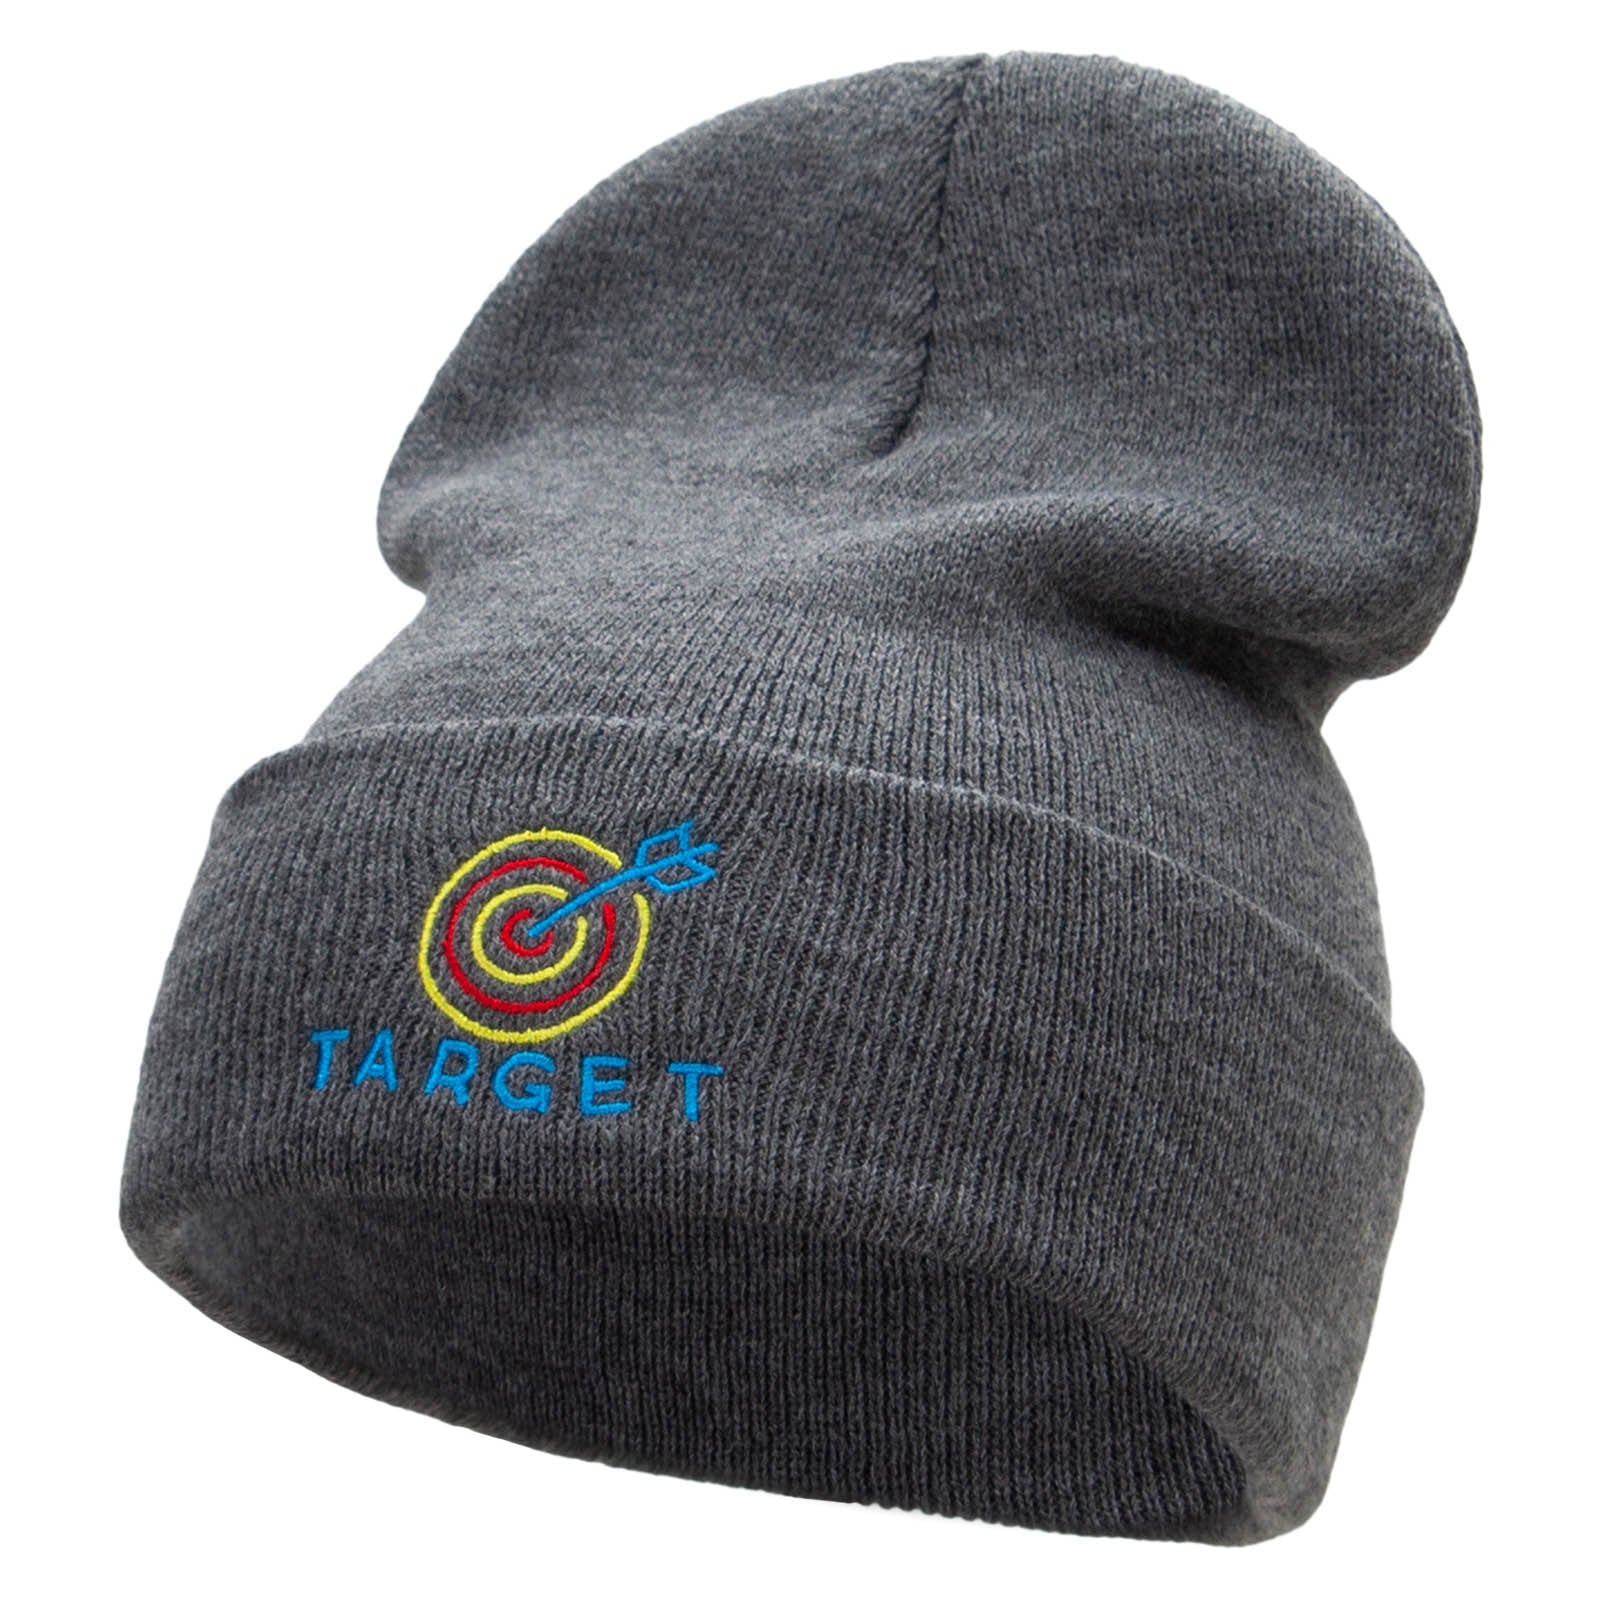 Neon Target Embroidered 12 Inch Long Knitted Beanie - Dk Grey OSFM